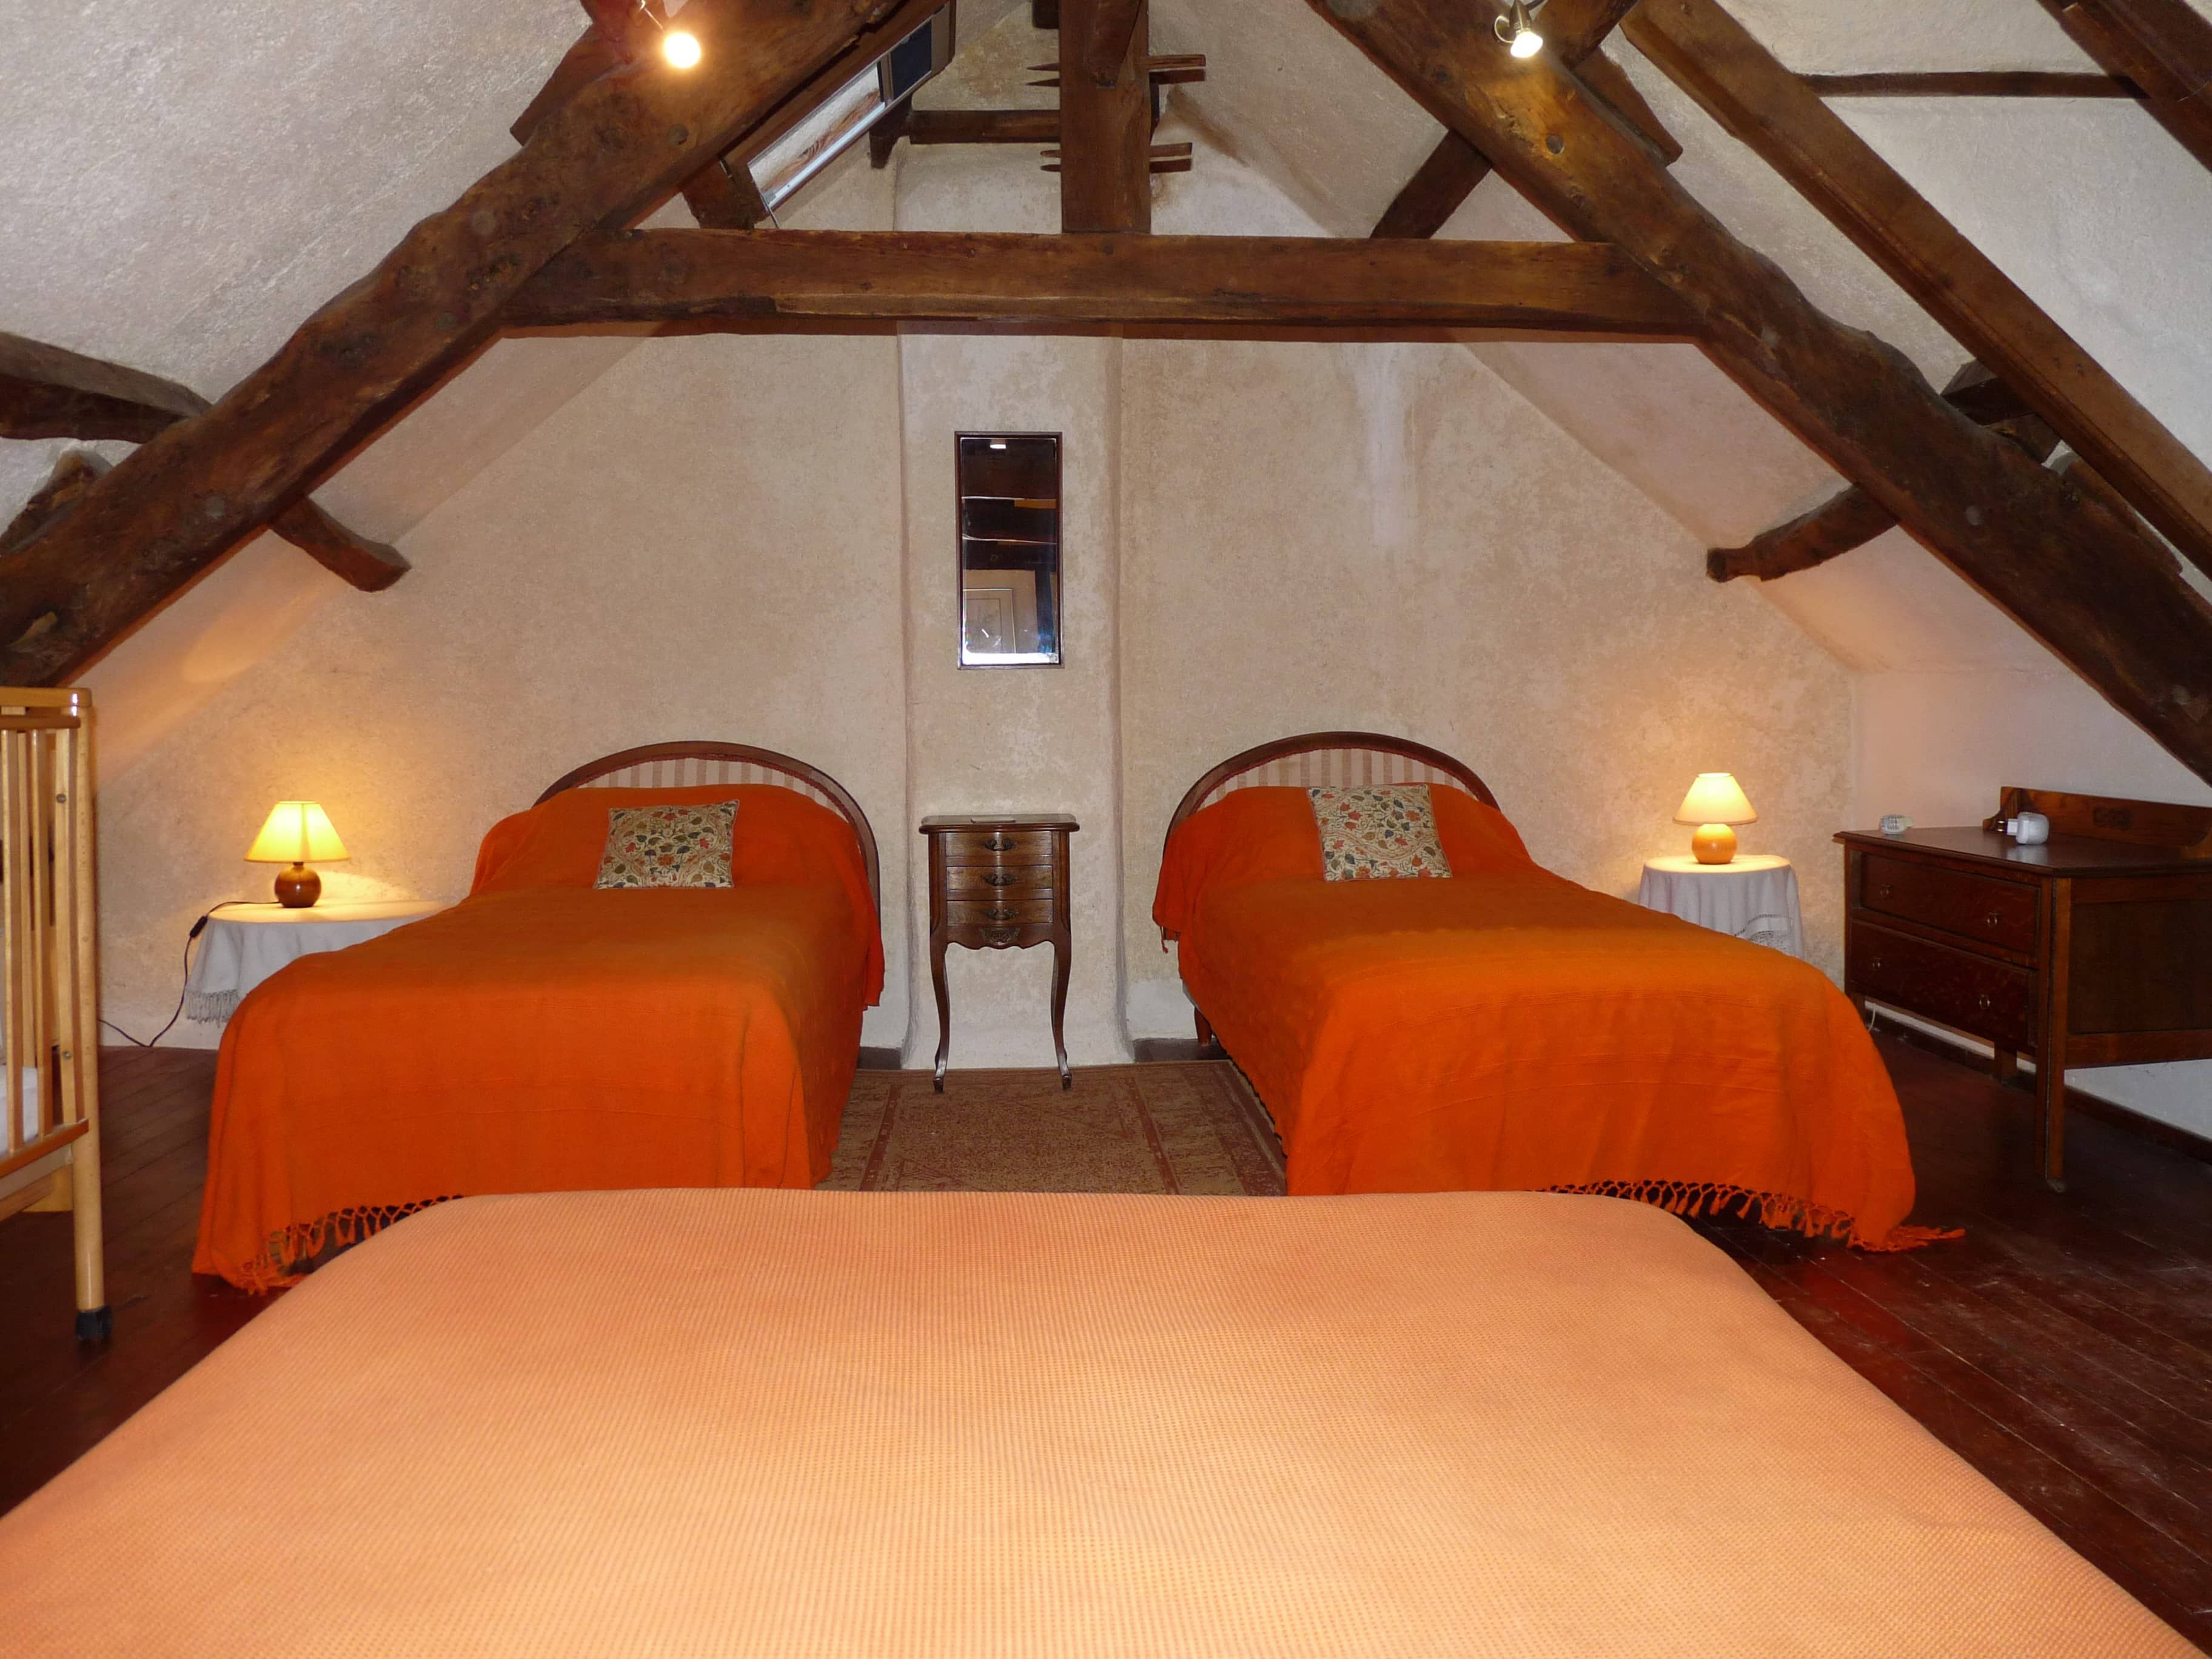 Spacious and comfortable bedroom of La Julerie cottage in Brittany, France, with a king-size bed, elegant rustic decor, a stone fireplace, and a panoramic view of the surrounding countryside. Perfect for a peaceful night's sleep after a day of sightseeing in the Brittany region.